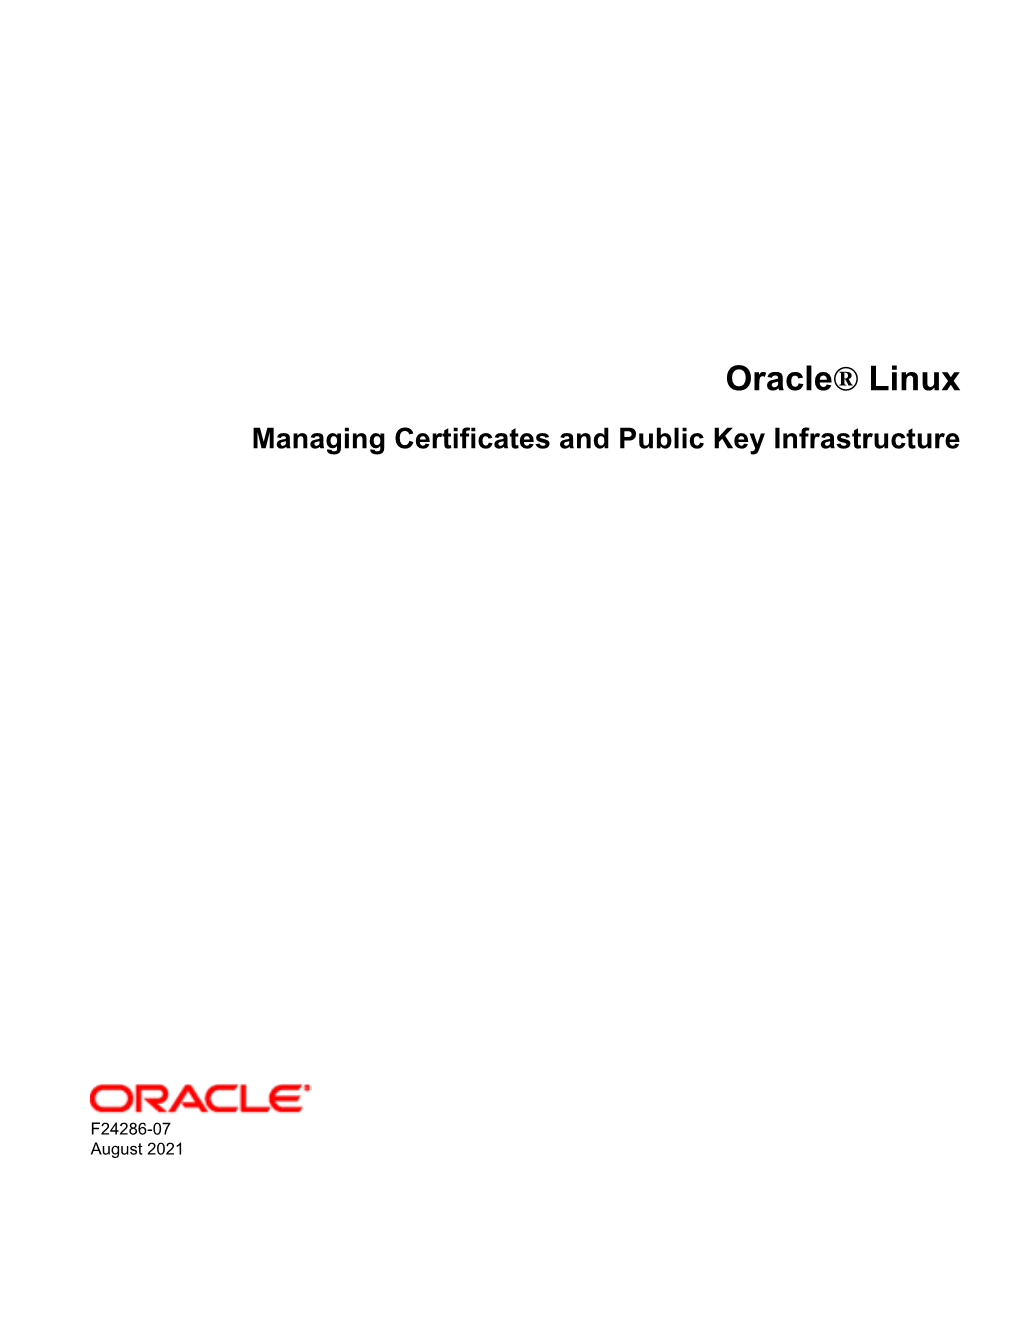 Oracle® Linux Managing Certificates and Public Key Infrastructure